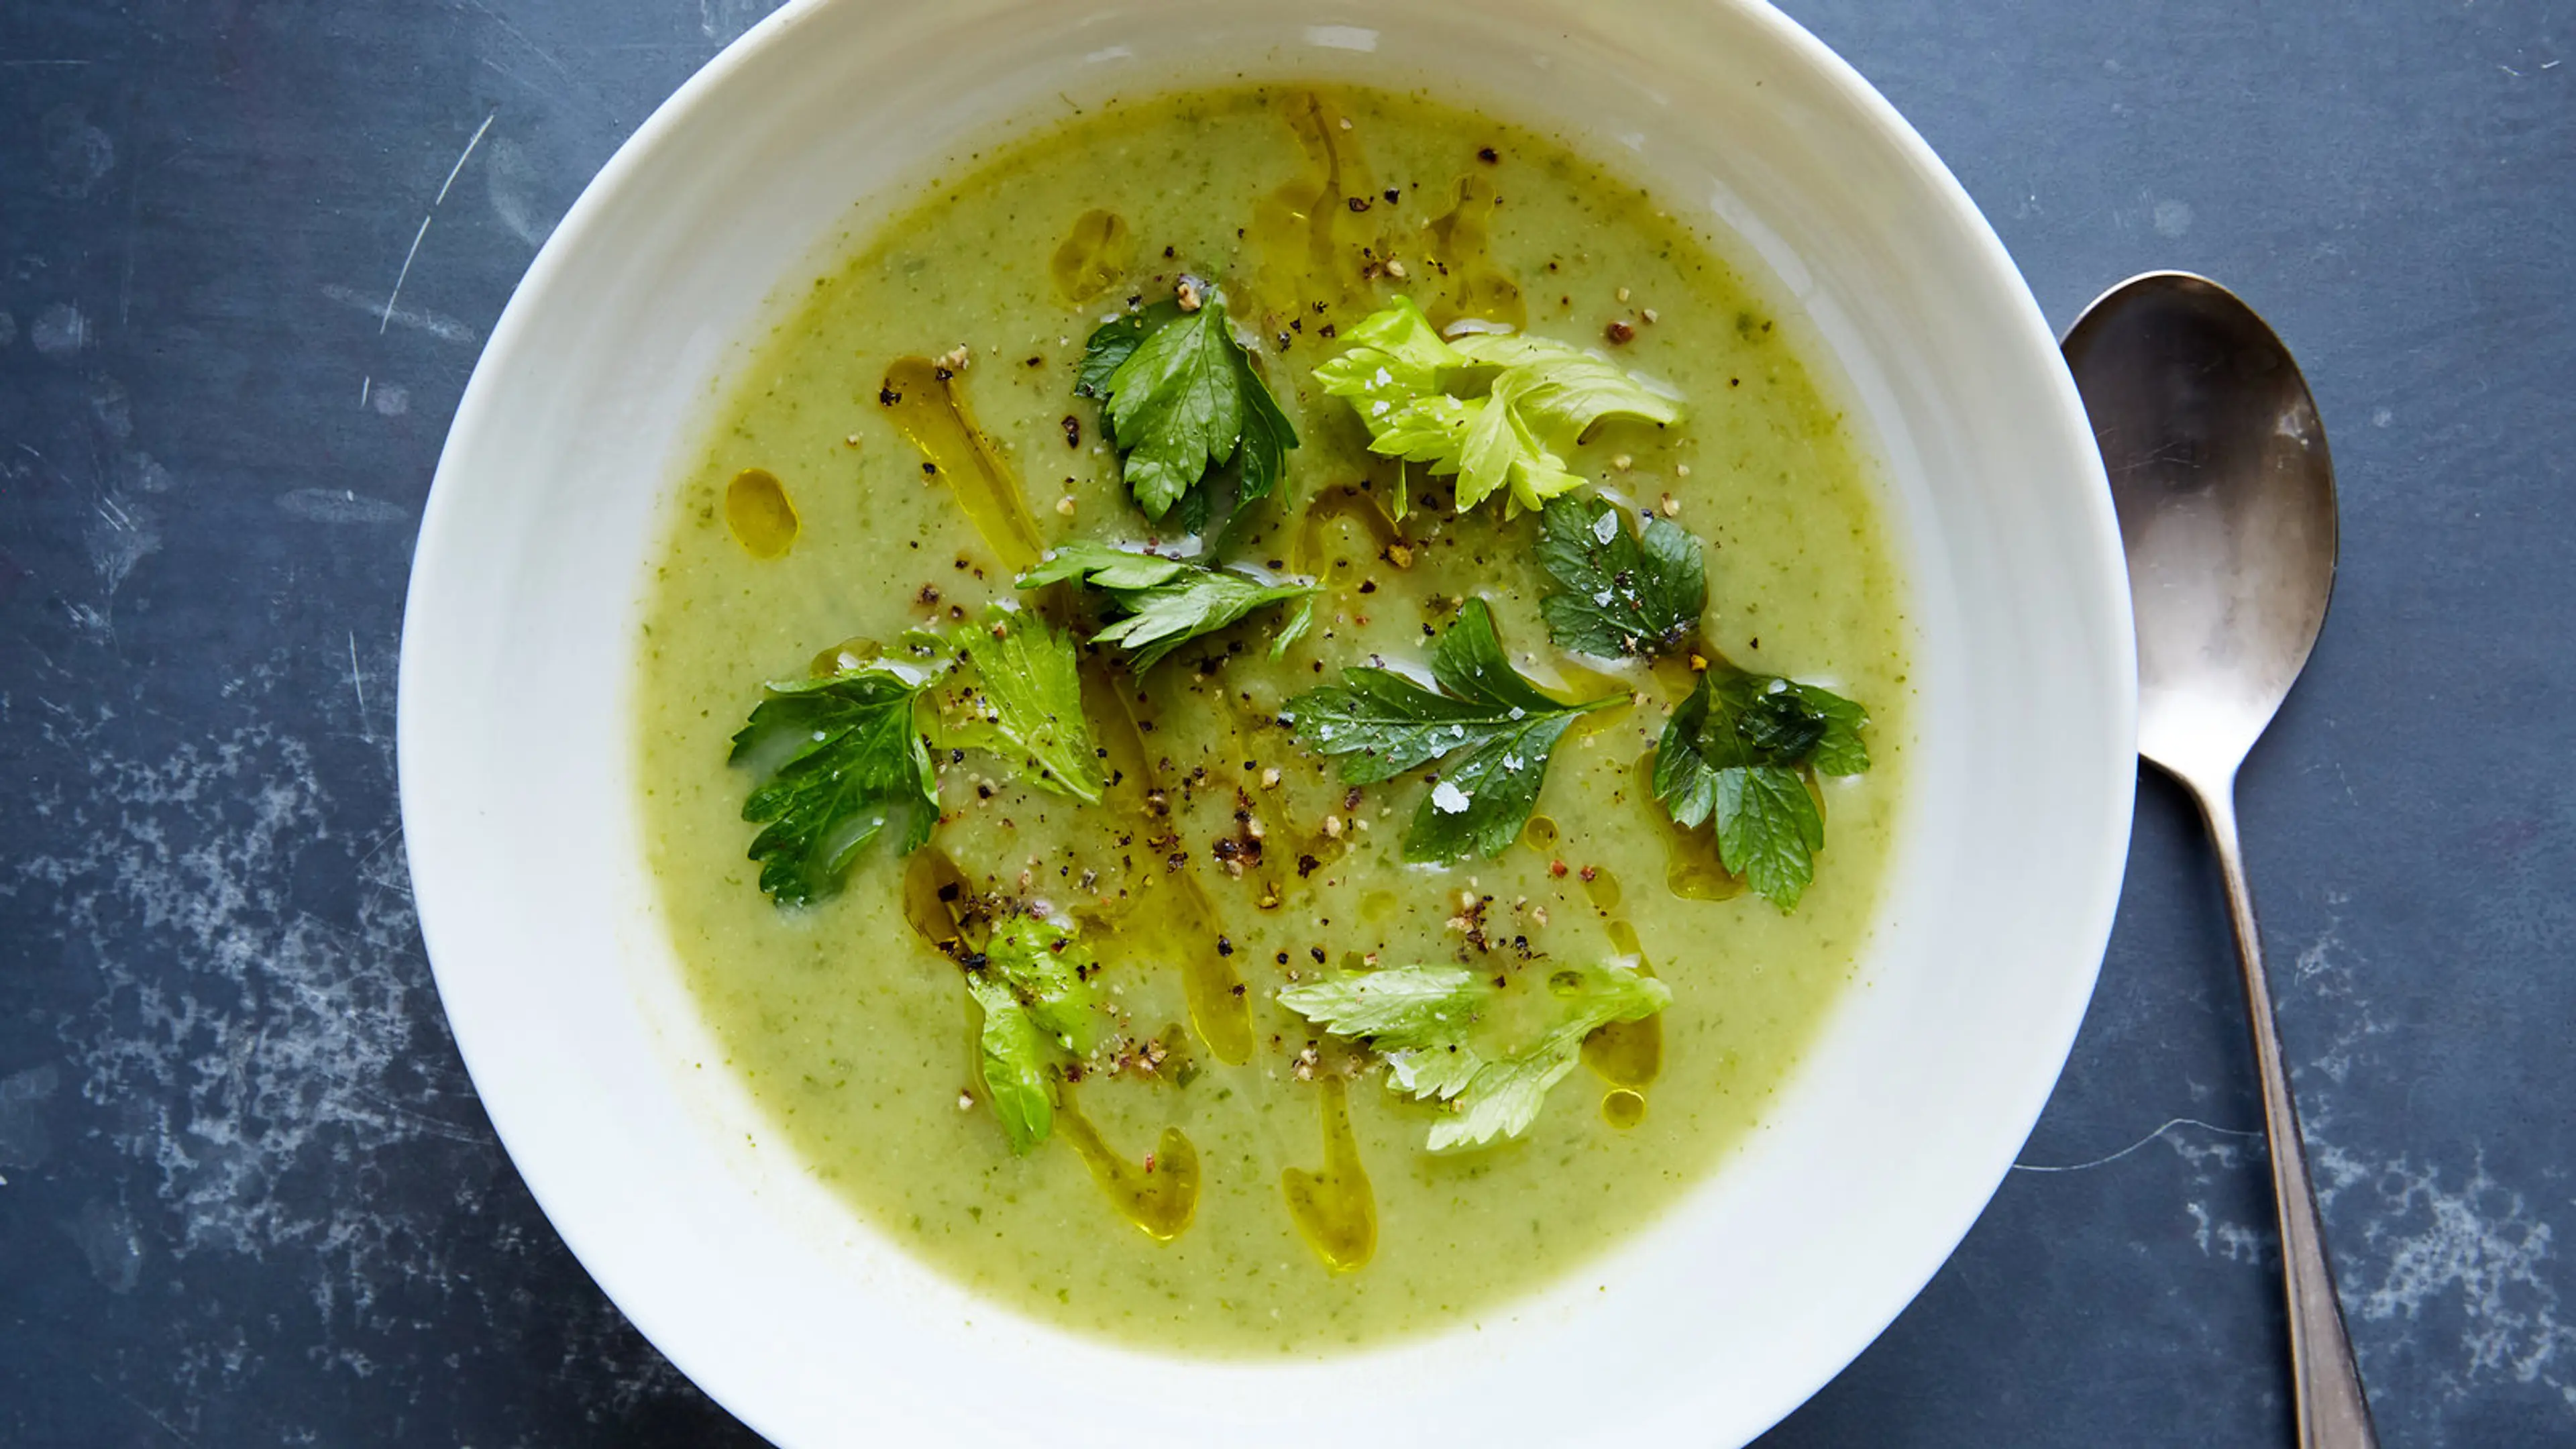 Celery-Leek Soup With Potato and Parsley